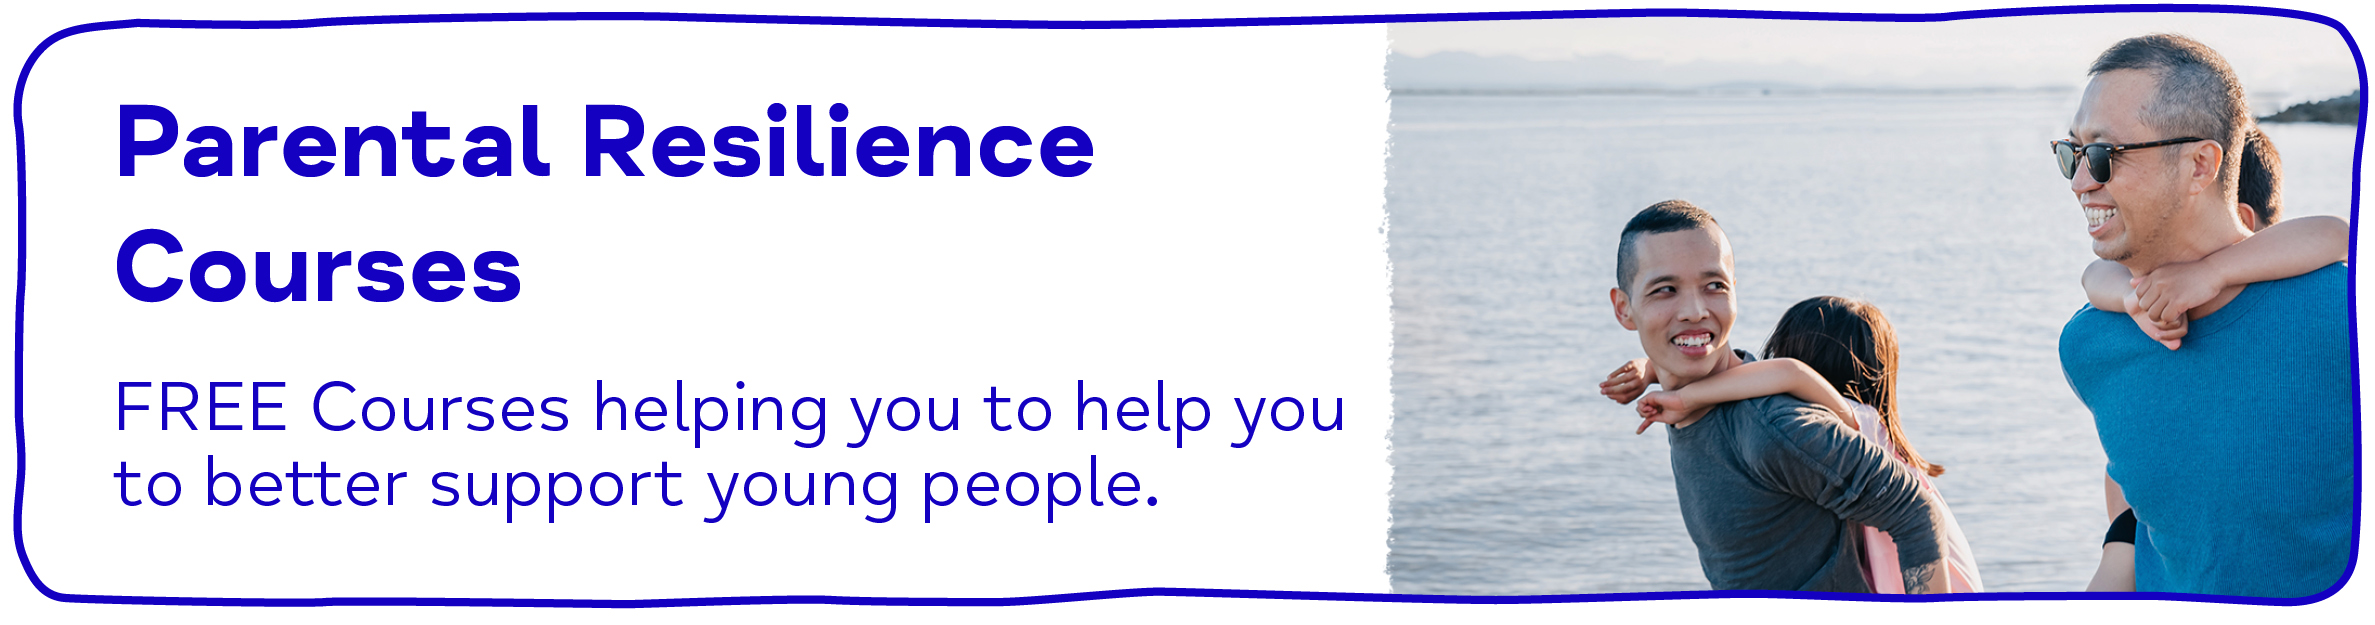 Parental Resilience Courses FREE Courses helping you to help you to better support young people.